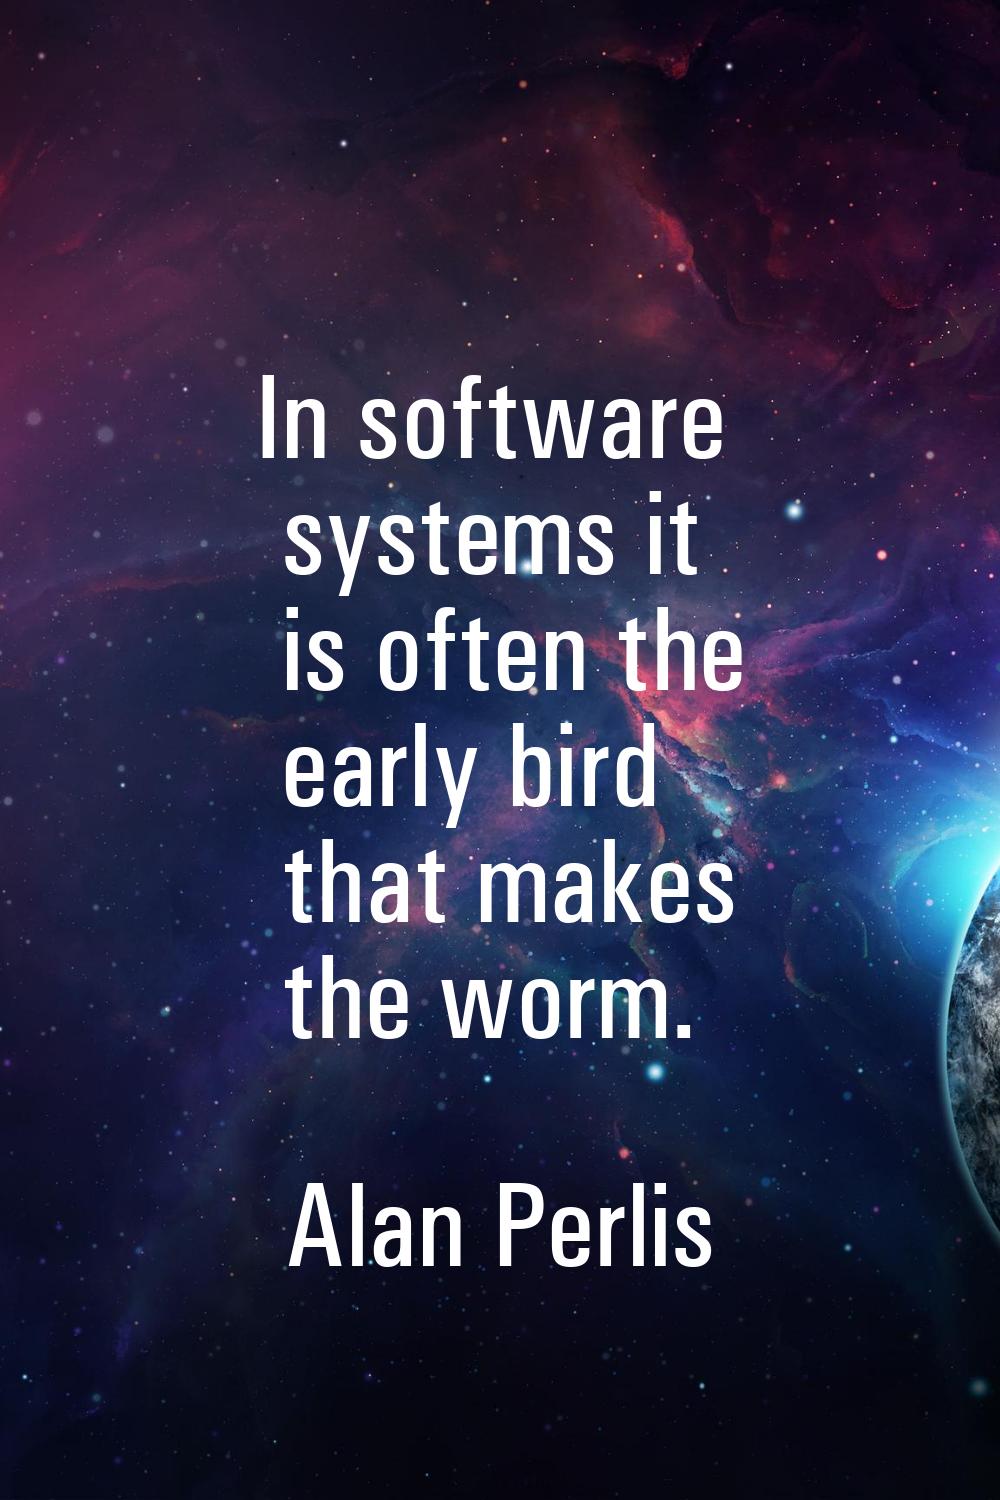 In software systems it is often the early bird that makes the worm.